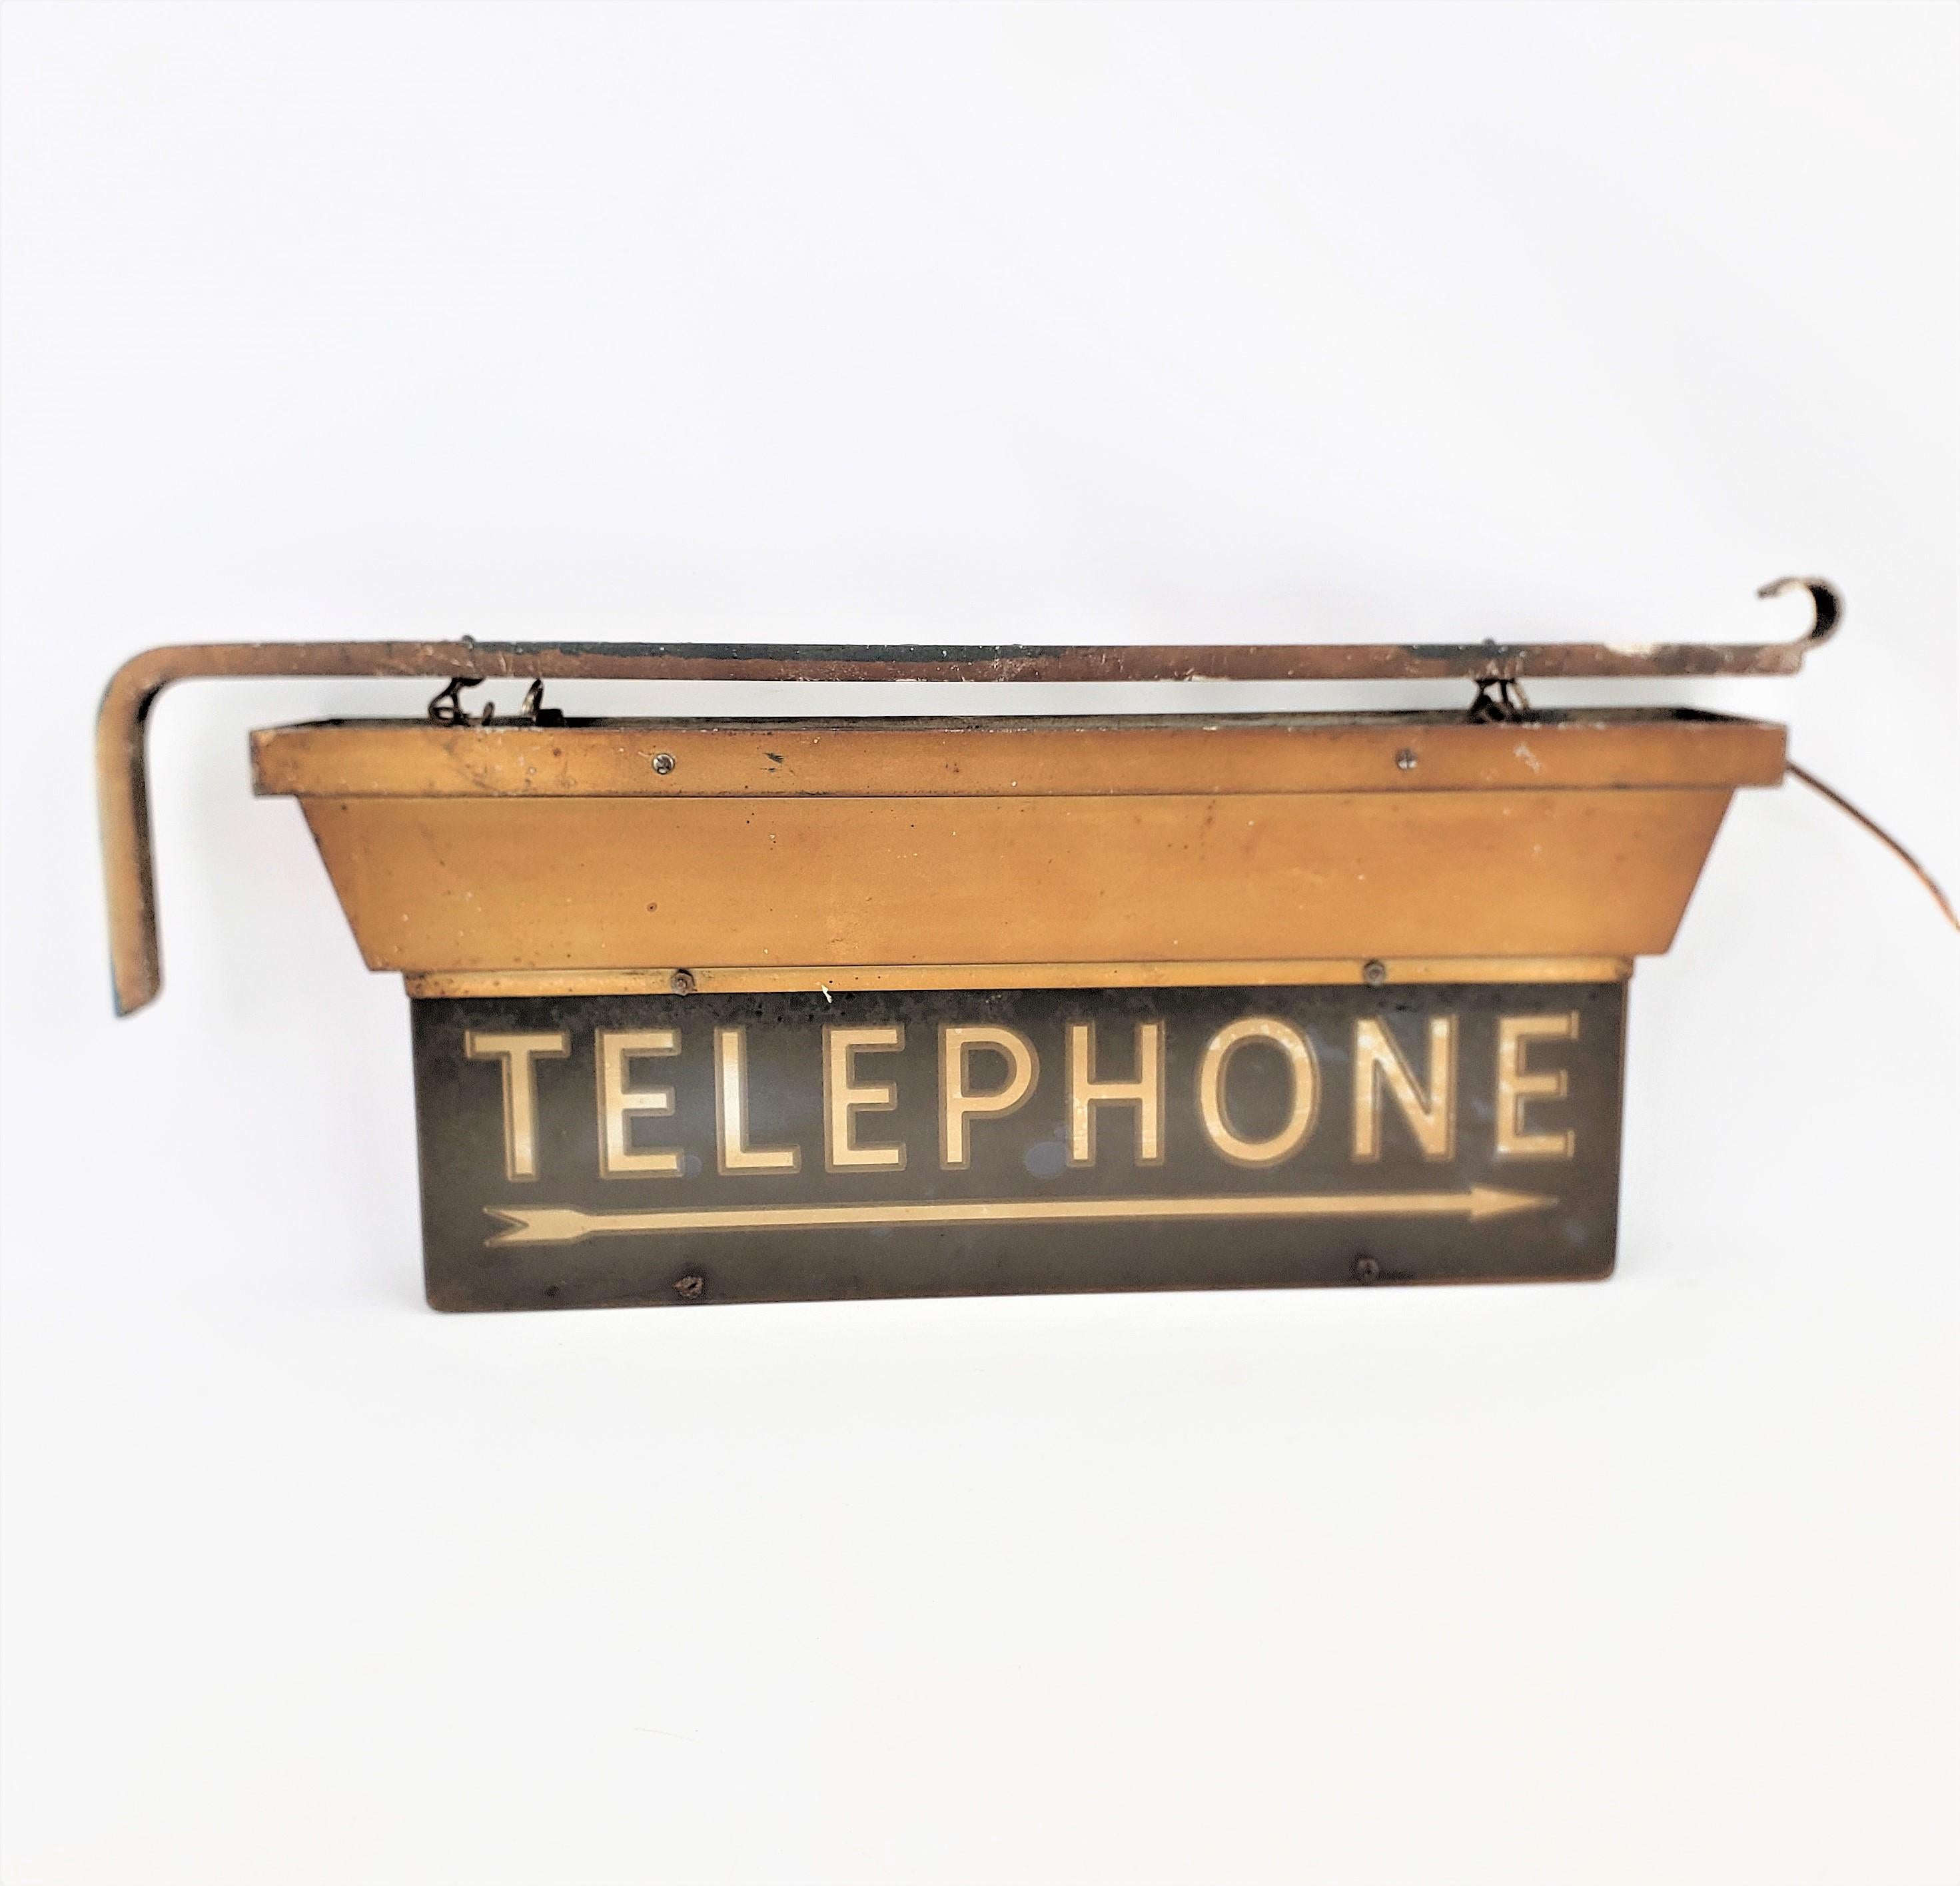 This salvaged commercial lighted telephone sign is signed by an unknown maker, and originated from Canada, dating to approximately 1960 and done in the period Mid-Century style. The base is made of metal which has a gold finish, and the sign itself